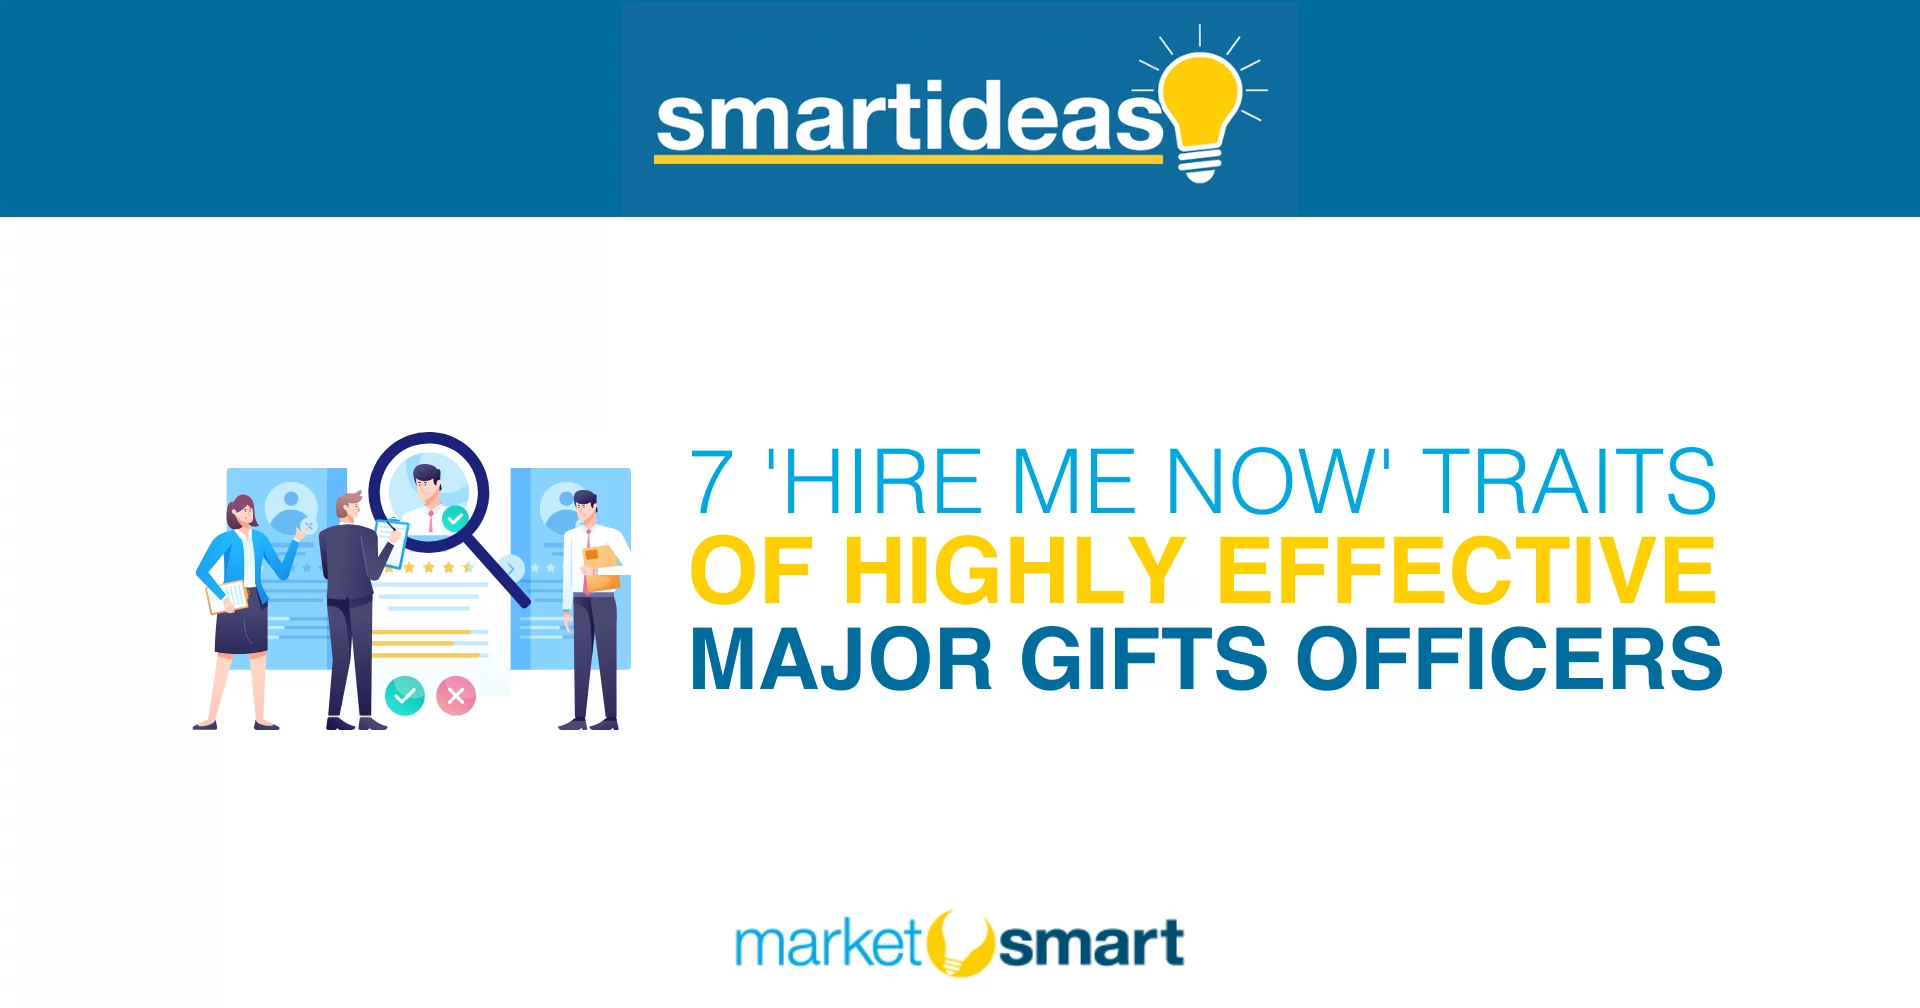 7 Traits of Highly Effective Major Gifts Officers – MarketSmart